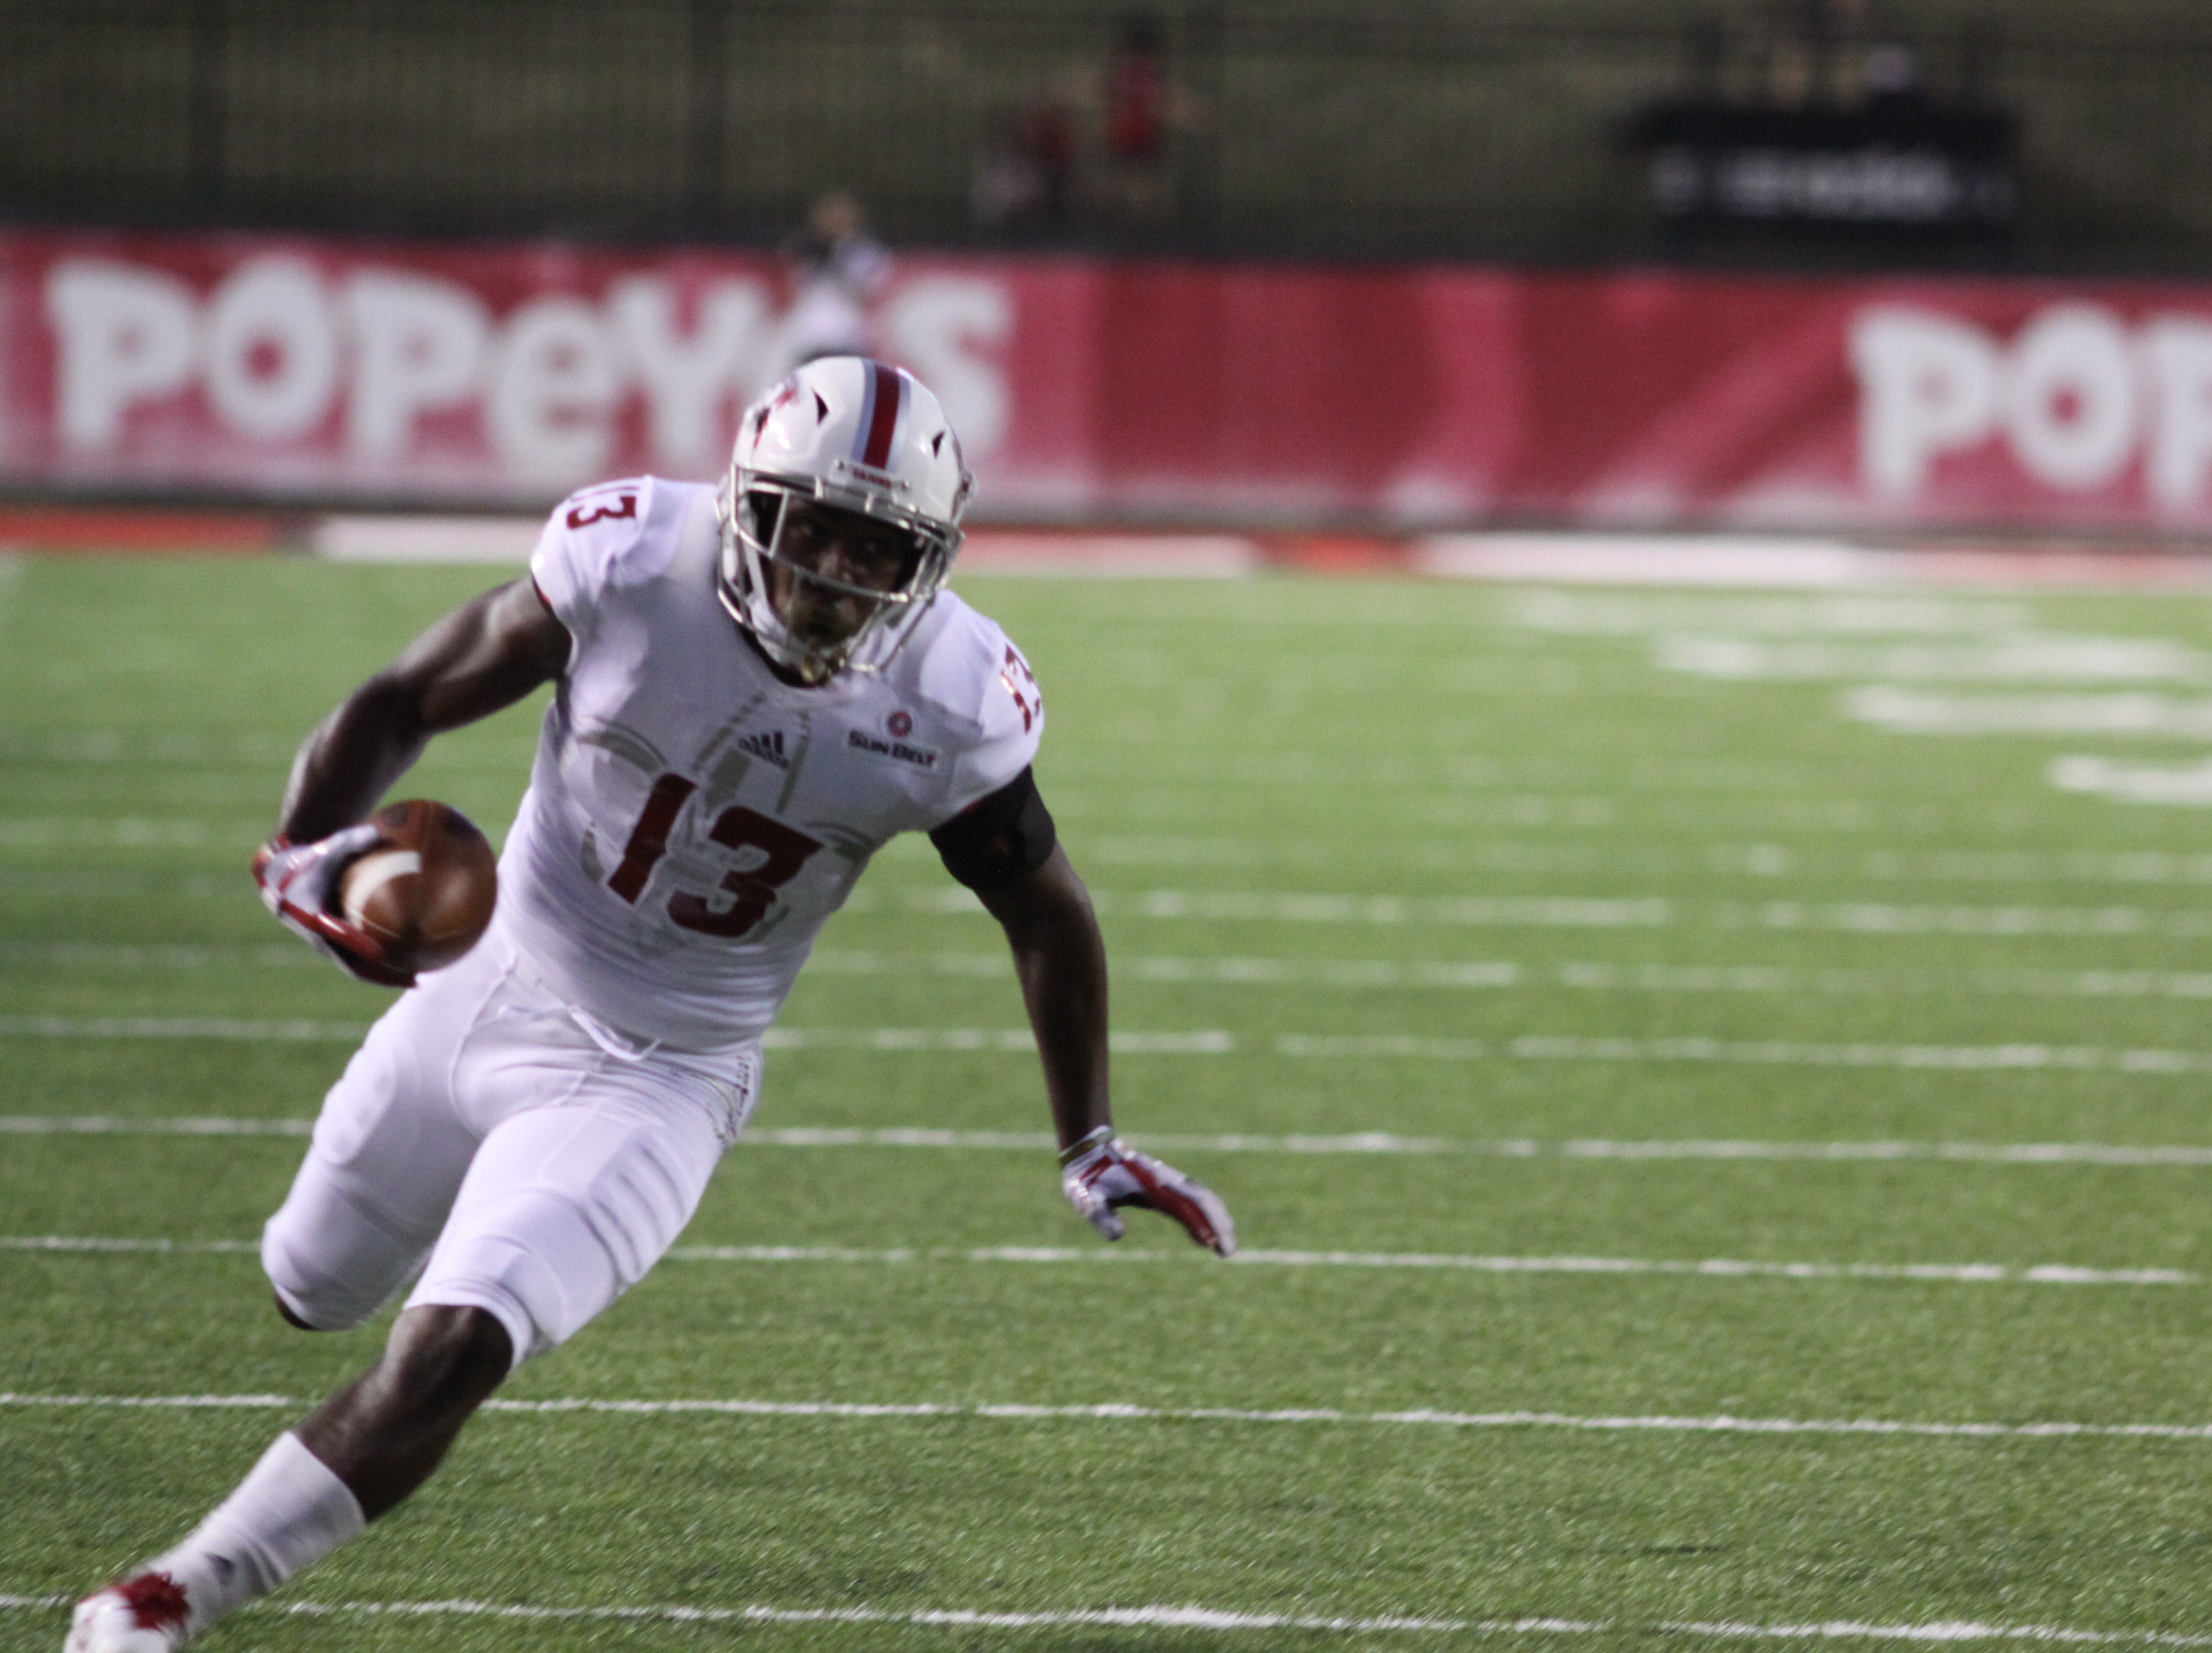 FIRST HALF OUTBURST HELPS A-STATE BEAT CAJUNS, 47-3